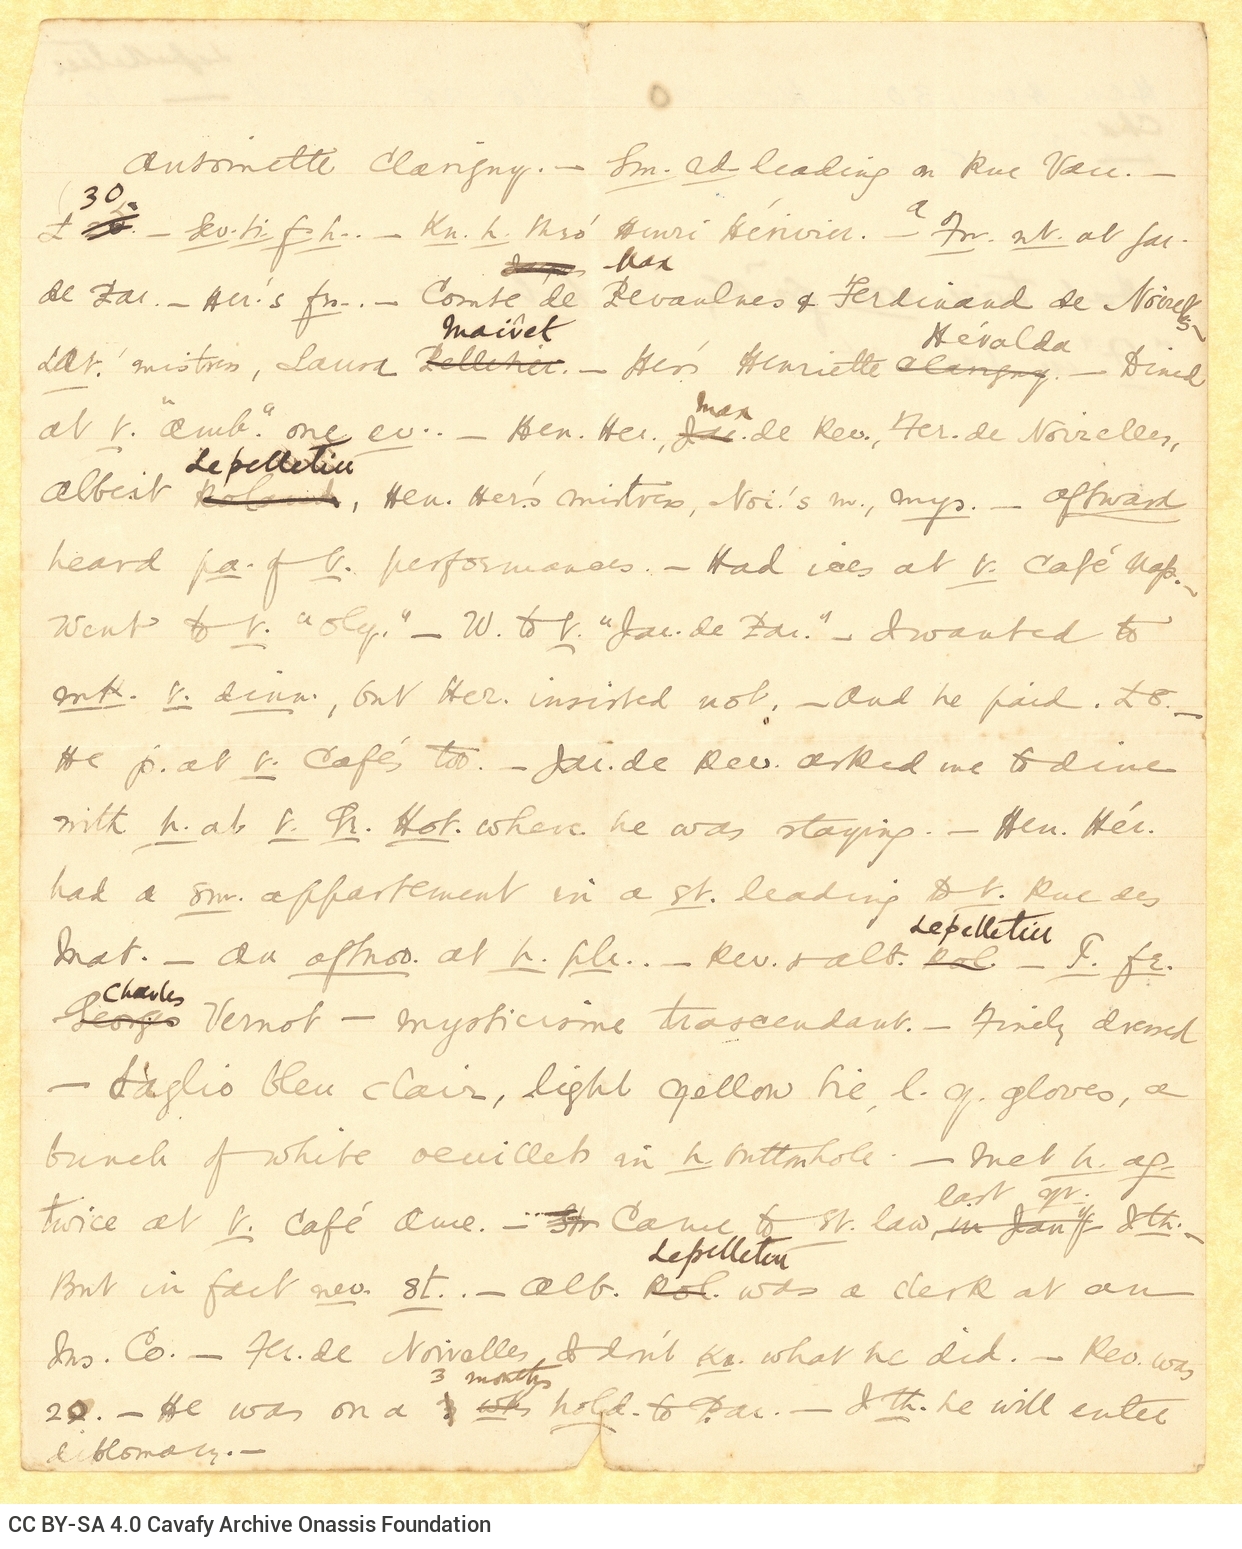 Handwritten text by Cavafy on both sides of a sheet. Abbreviations, cancellations and emendations. The poet refers to loca